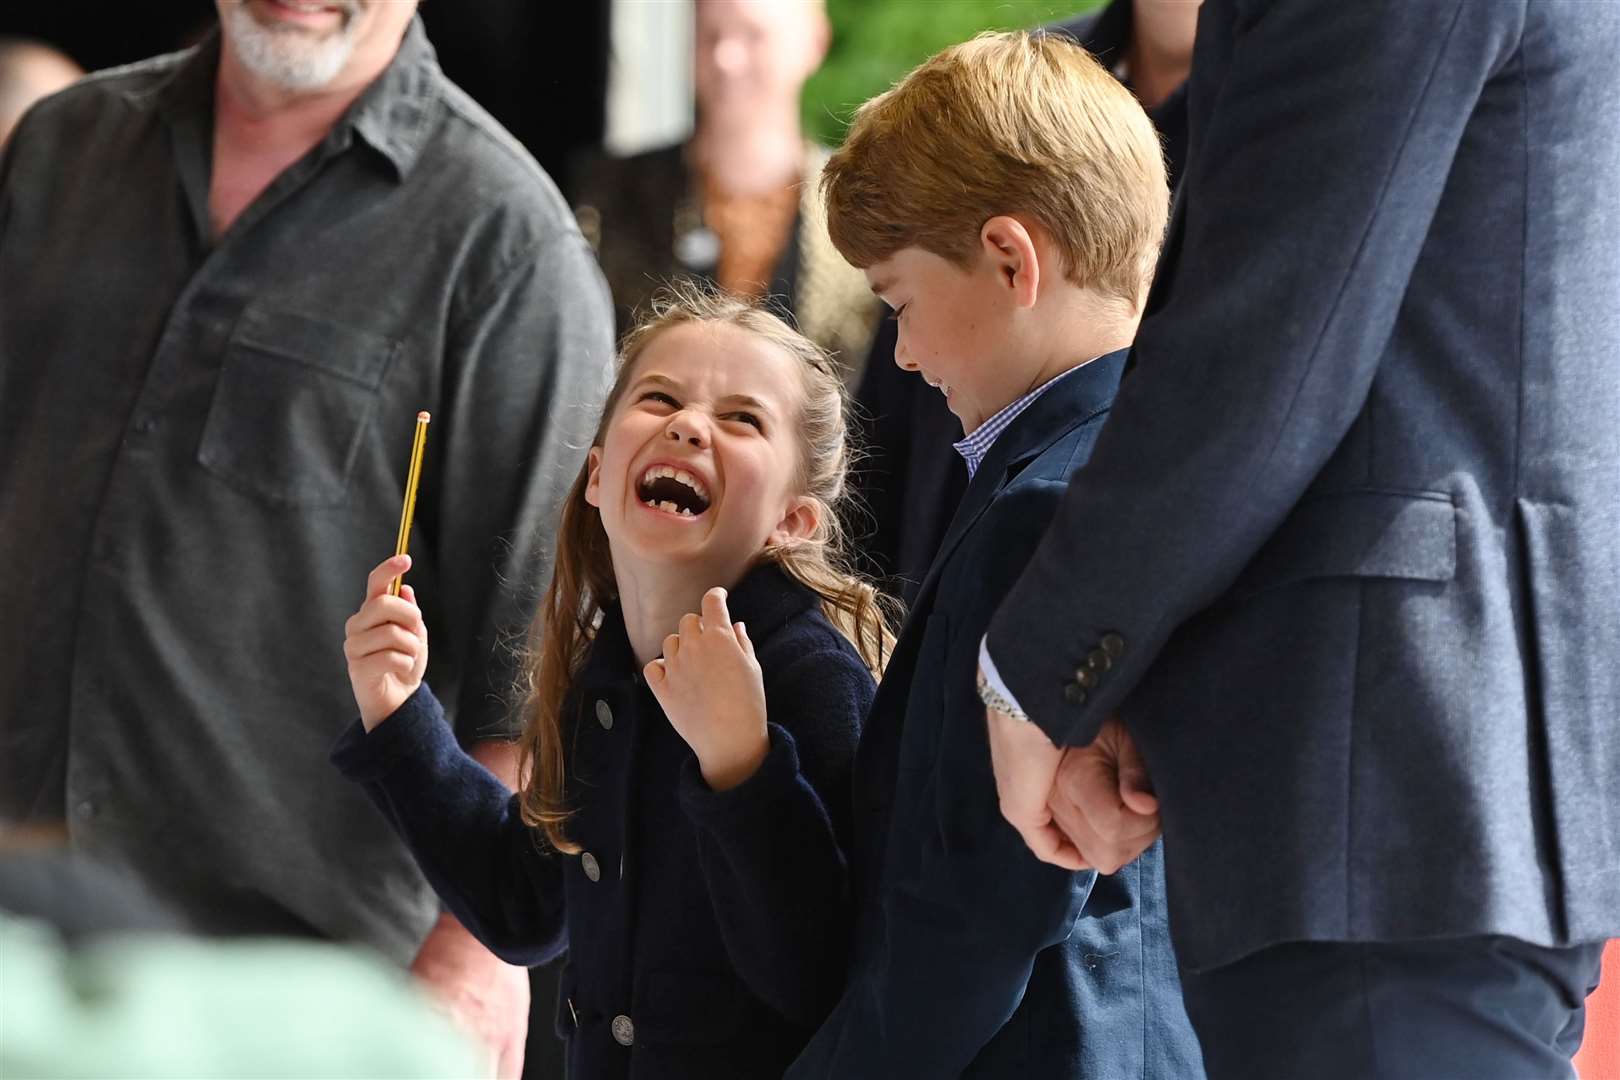 Charlotte laughs as she conducts a band next to her brother, Prince George (Ashley Crowden/PA)